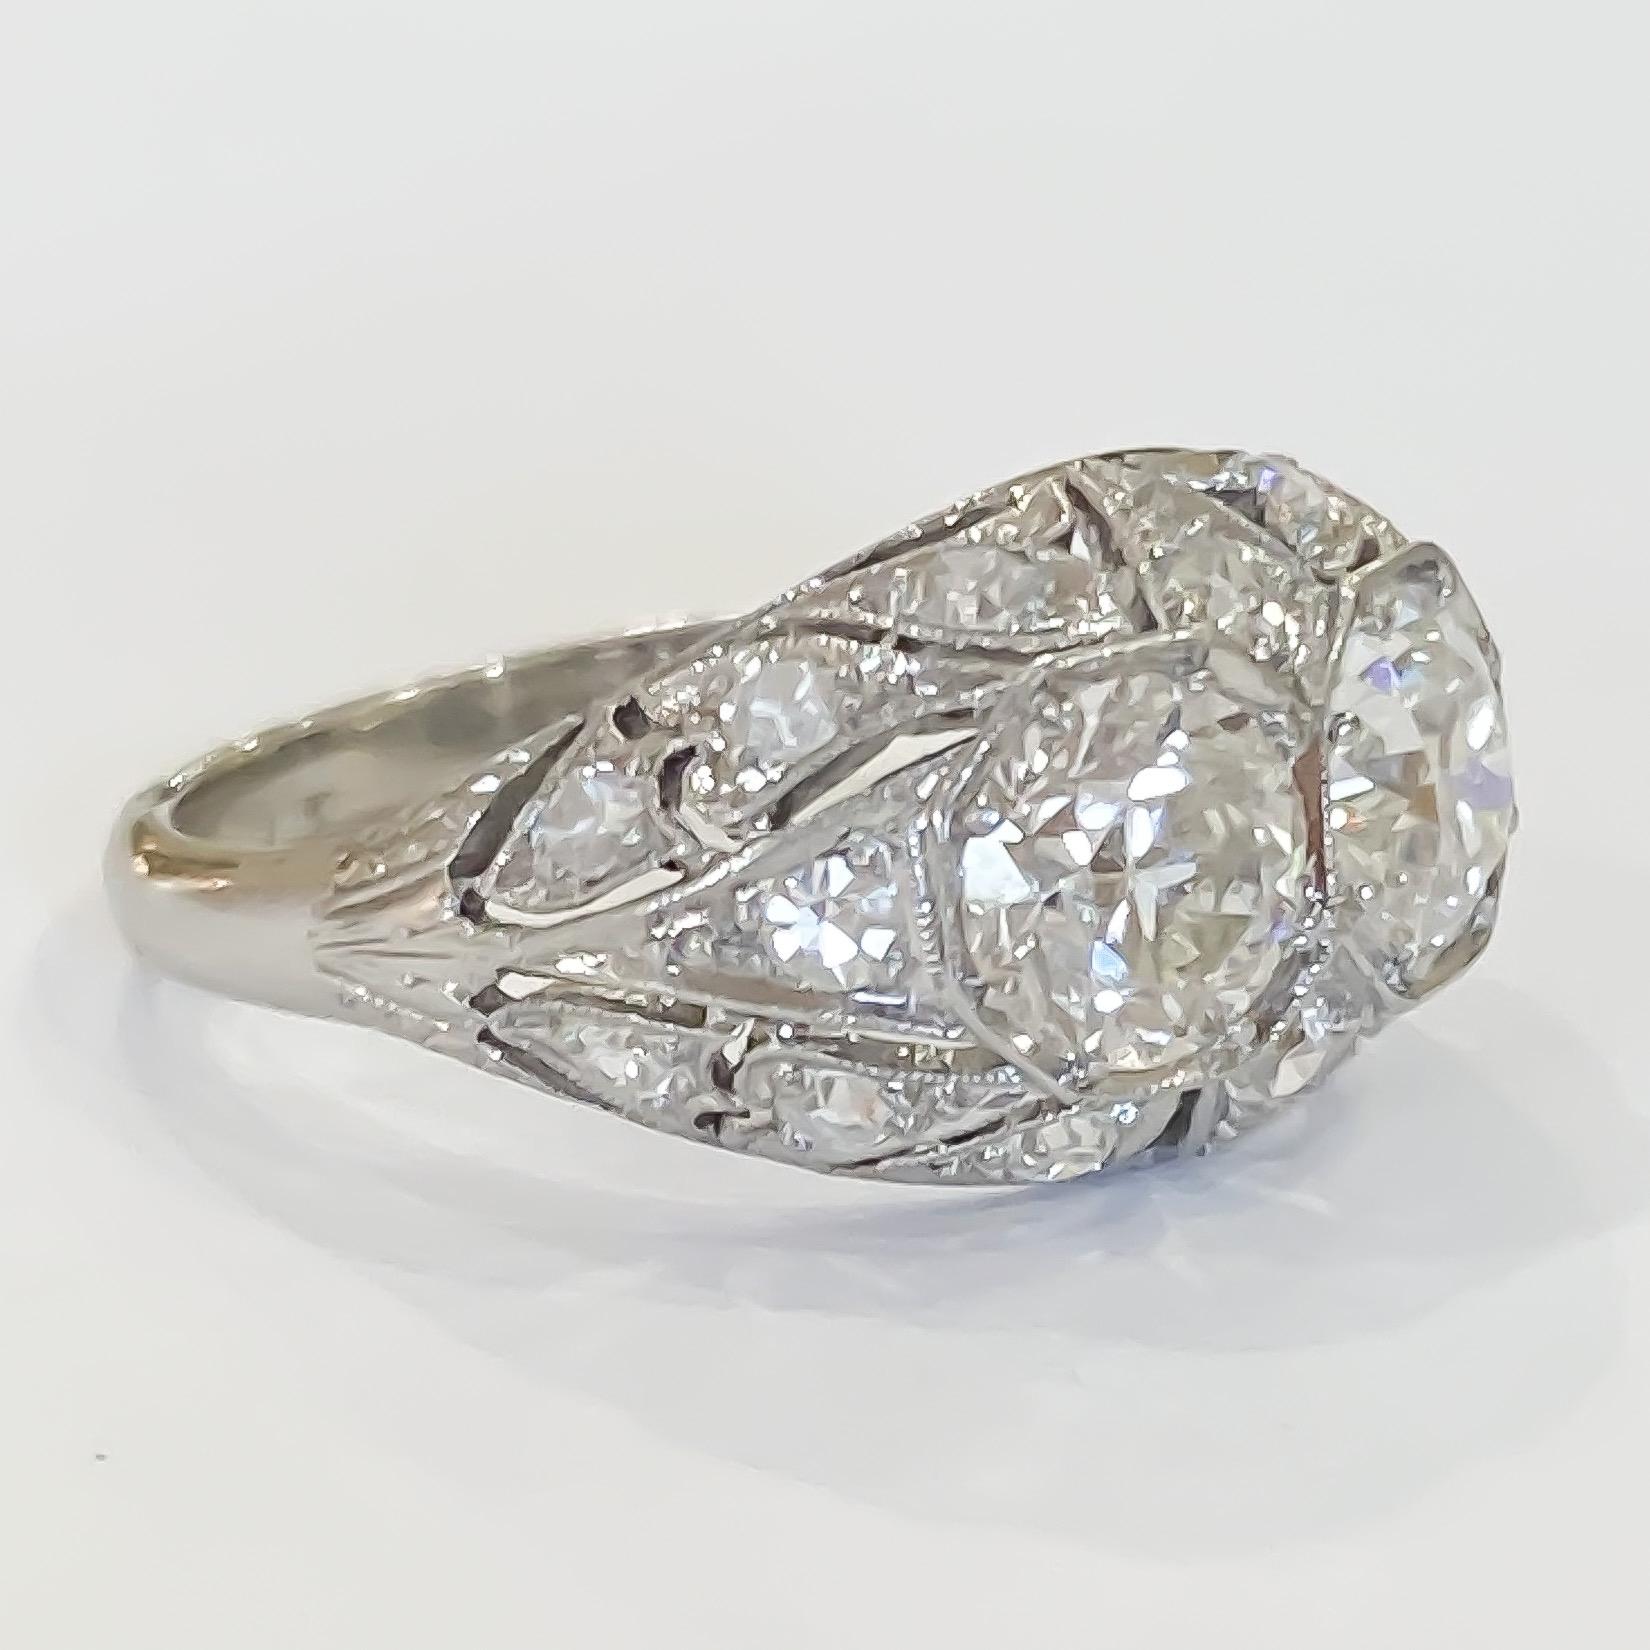 Lovely estate vintage diamond ring in original condition. The ring contains two (2) main Old European Cut diamonds and sixteen (16) single cut diamonds. The main diamonds have a total weight of 1.38 carats and the smaller diamonds weigh 0.56 carats